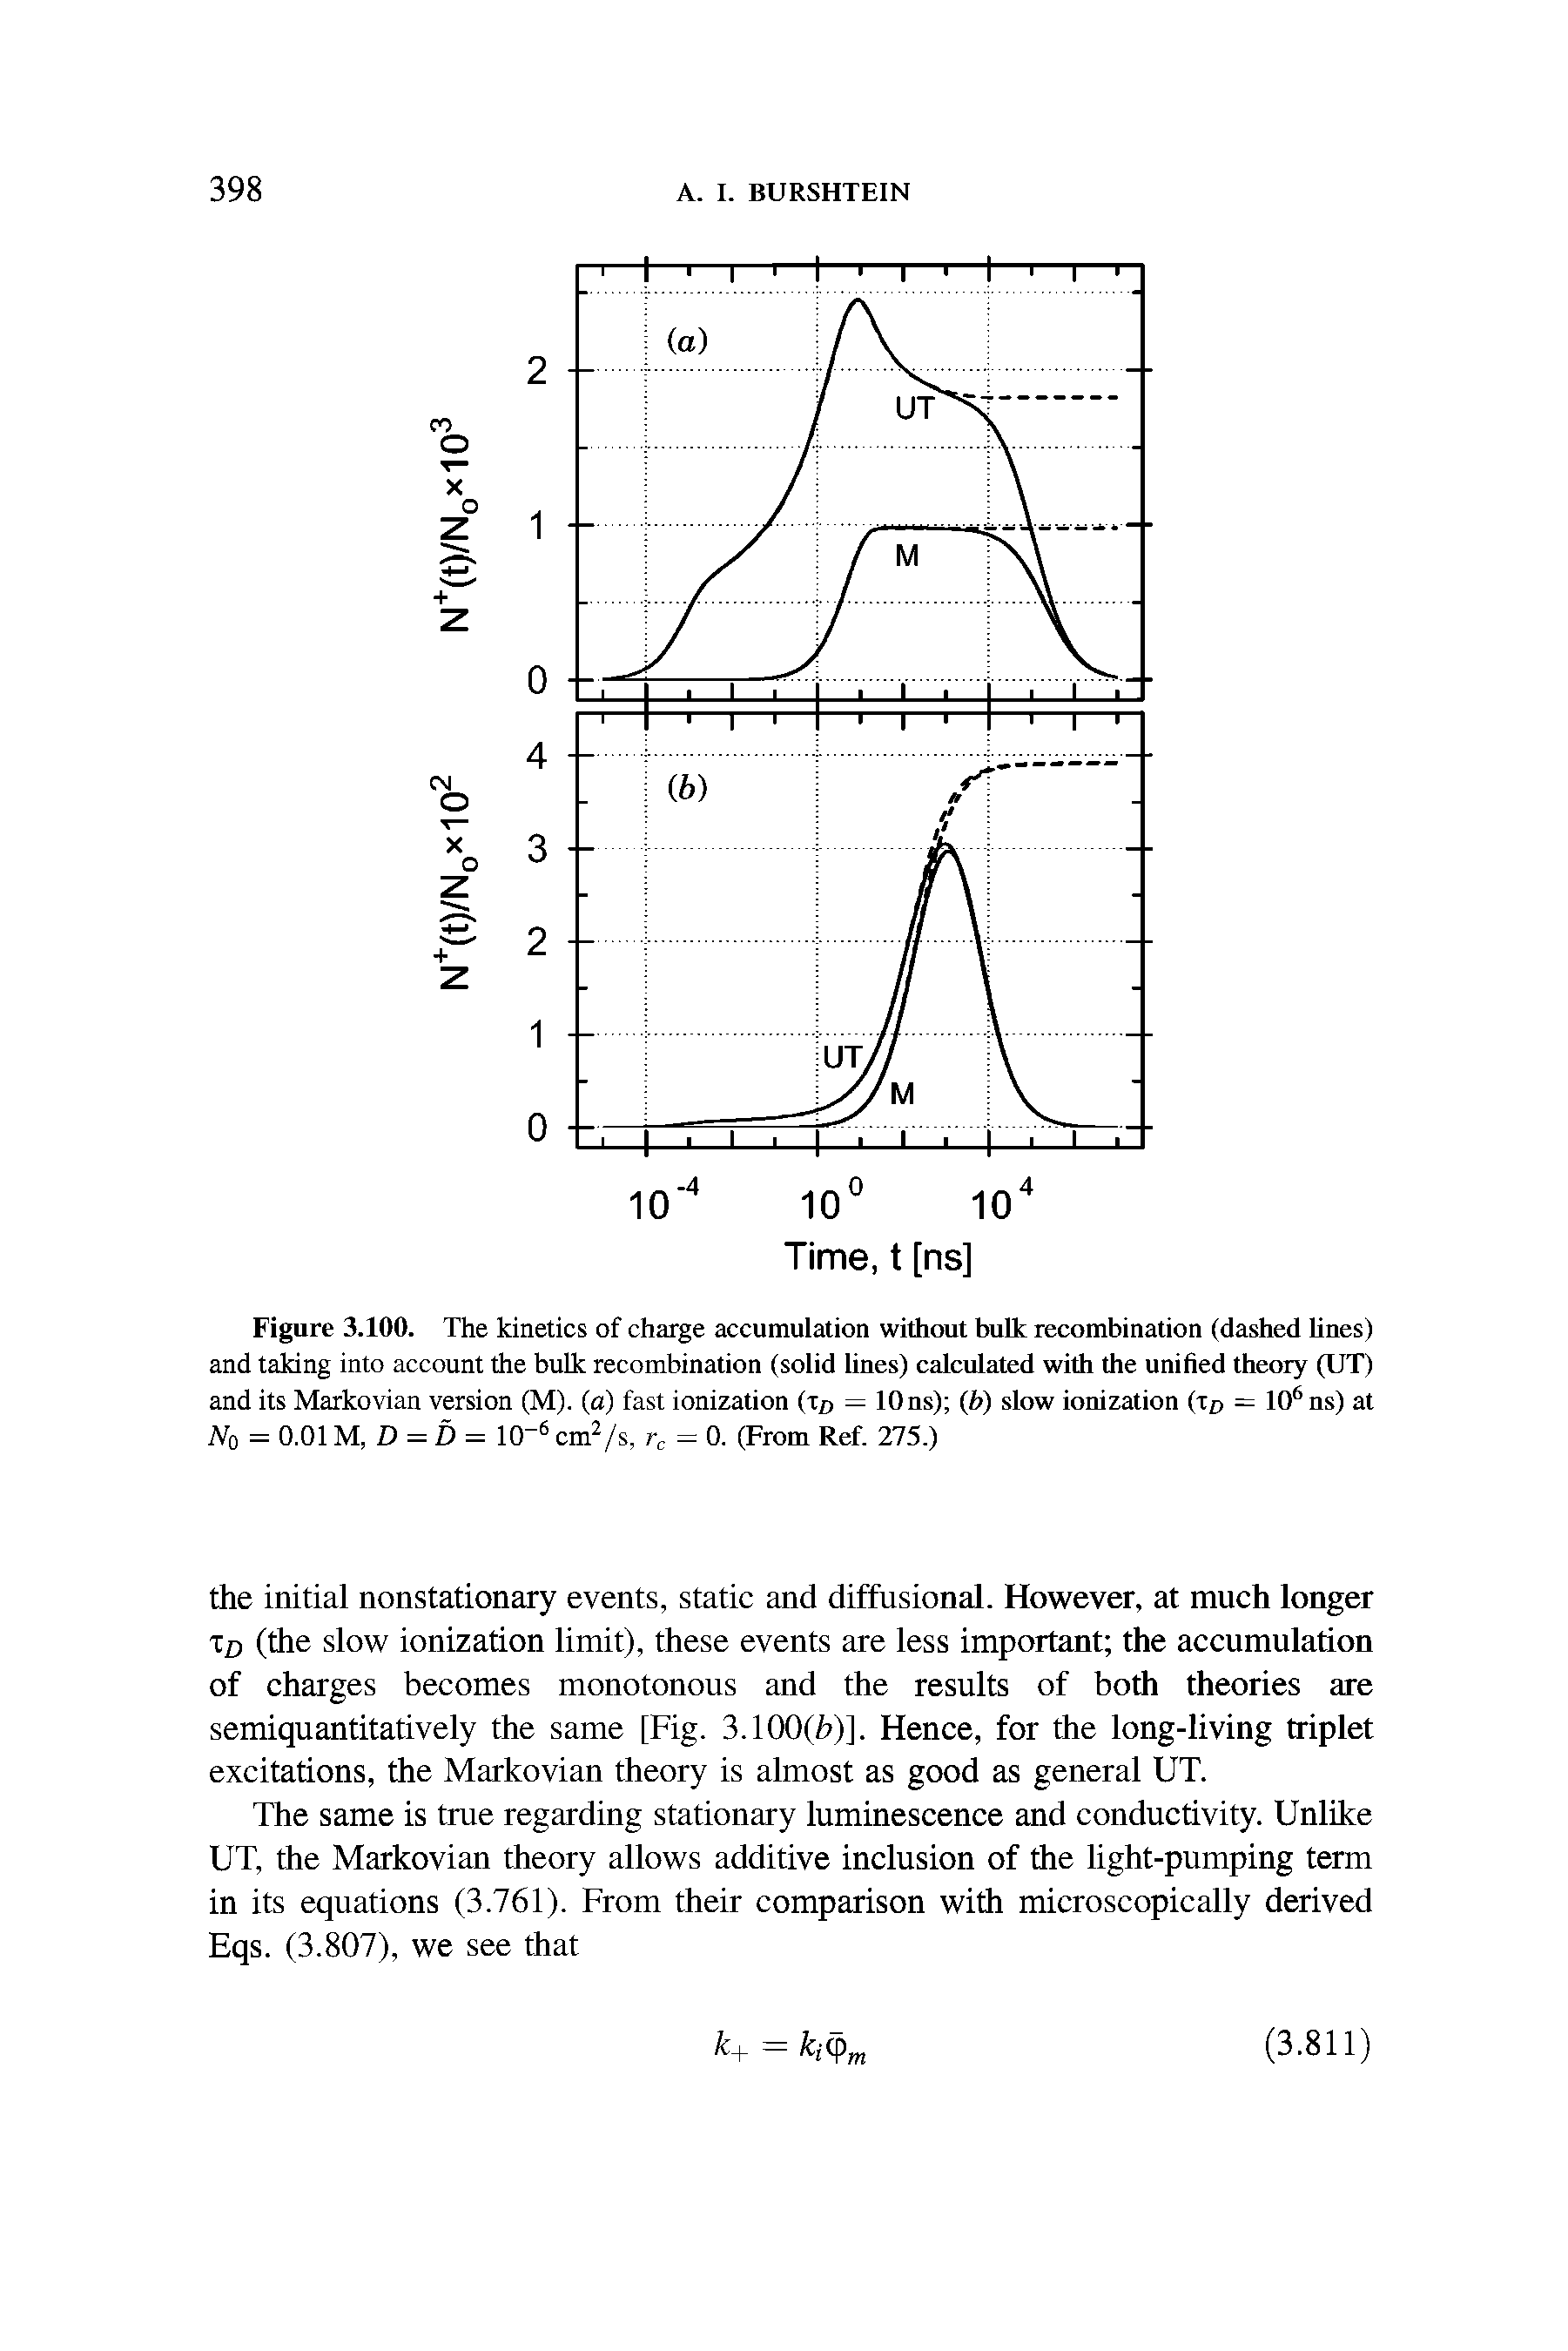 Figure 3.100. The kinetics of charge accumulation without bulk recombination (dashed lines) and taking into account the bulk recombination (solid lines) calculated with the unified theory (UT) and its Markovian version (M). (a) fast ionization (to = 10 ns) (h) slow ionization (tp = 106ns) at No = 0.01 M, D = D = 10-6 cm2/s, rc = 0. (From Ref. 275.)...